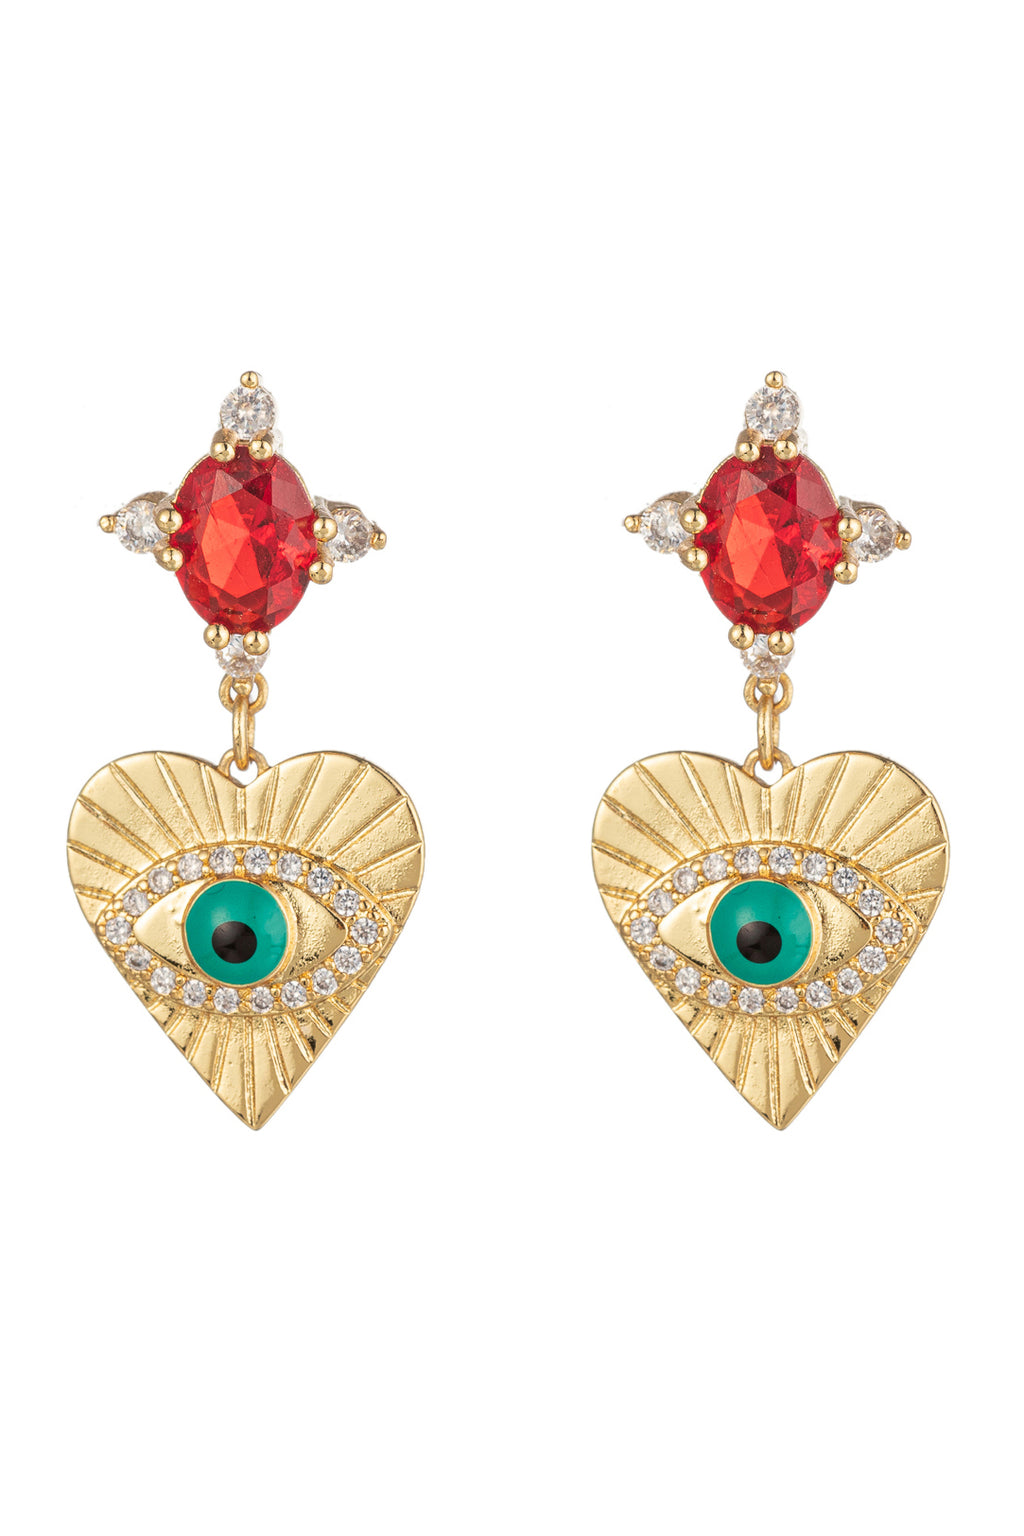 Eye heart pendant statement earrings studded with CZ crystals.